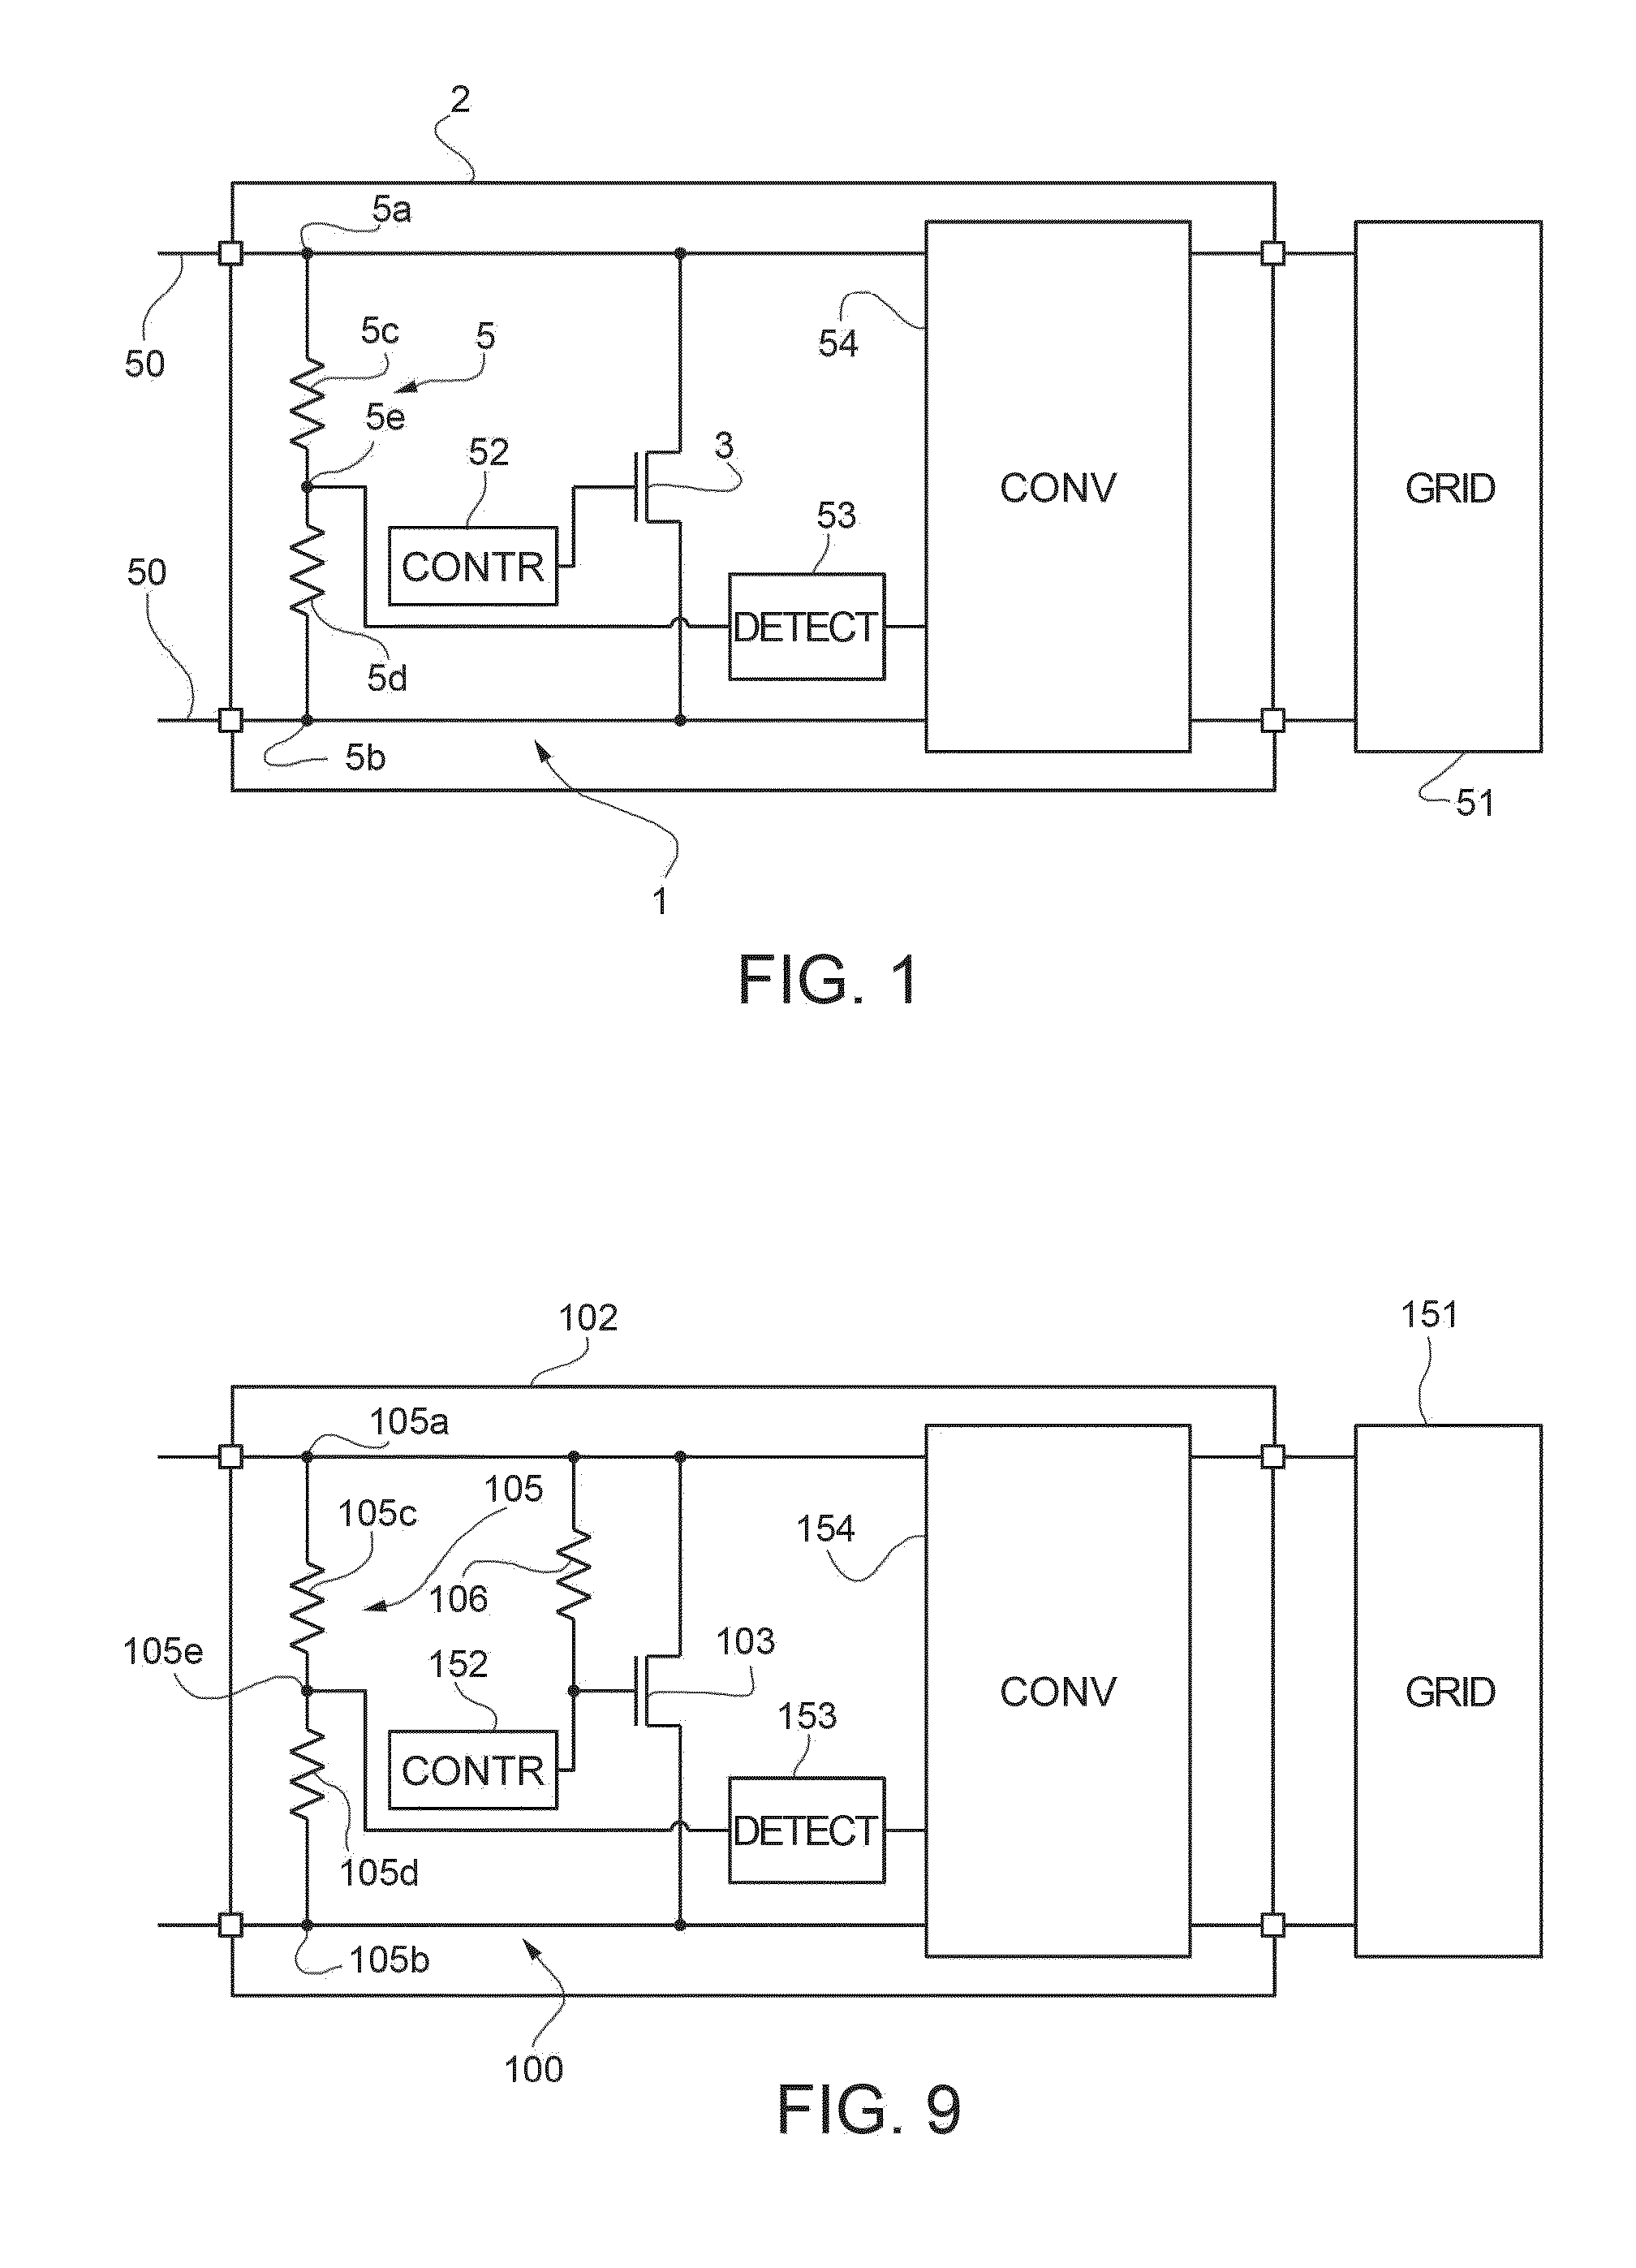 Semiconductor device integrating a voltage divider and process for manufacturing a semiconductor device